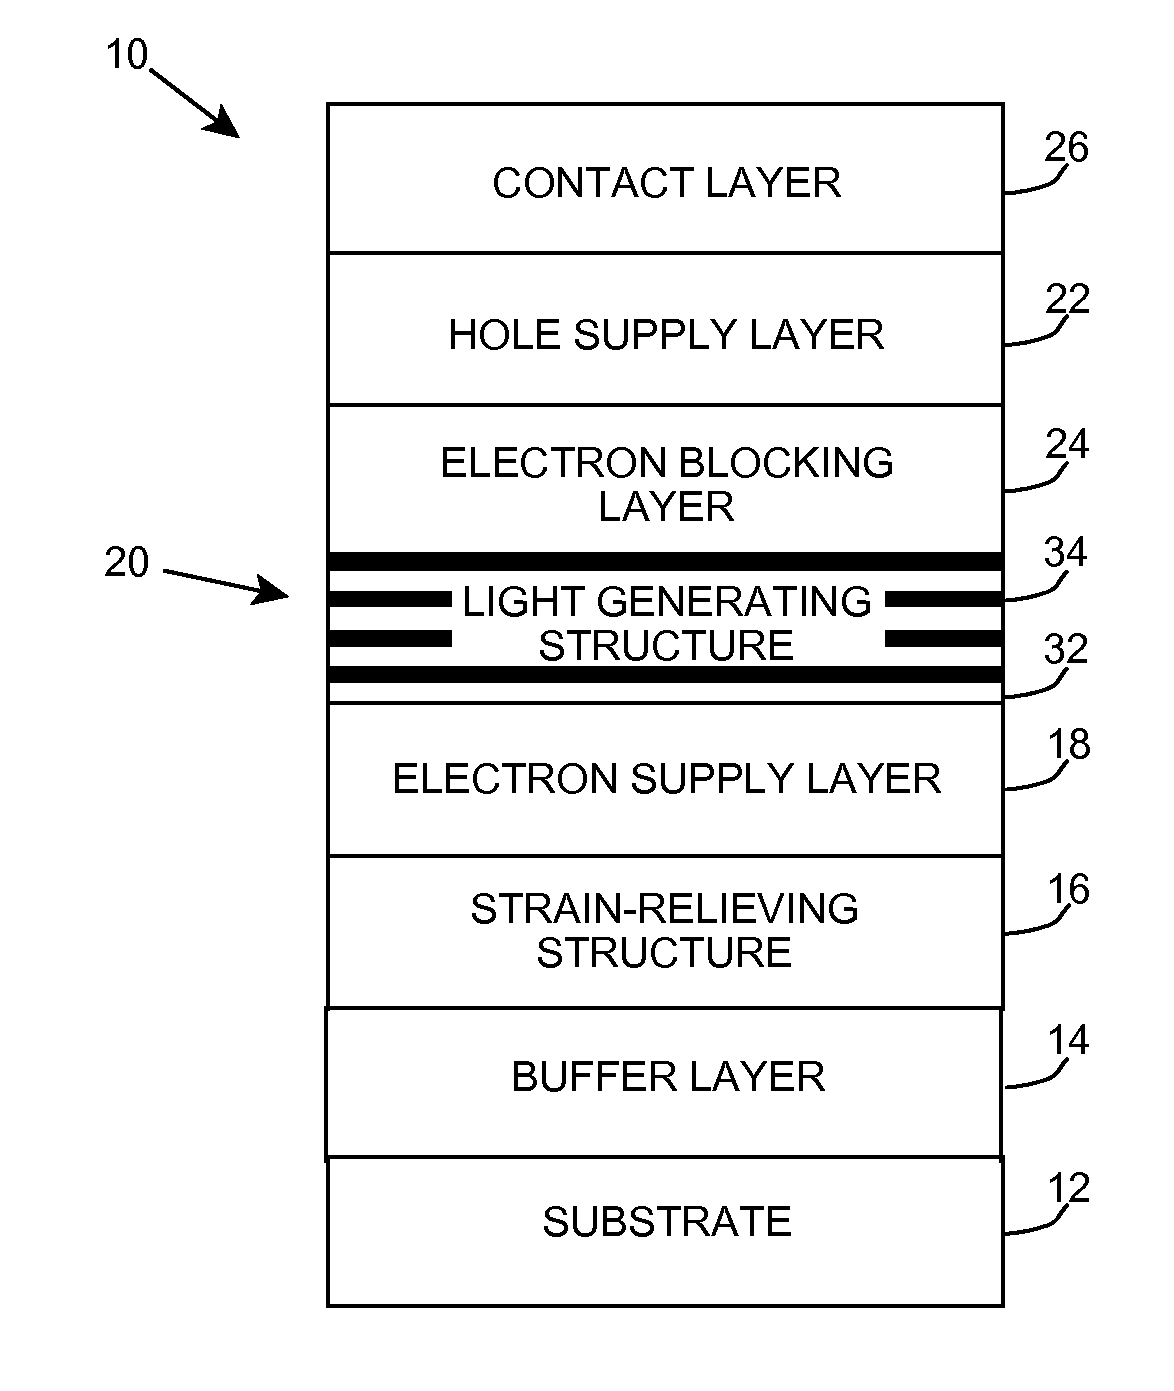 Heterostructure including light generating structure contained in potential well